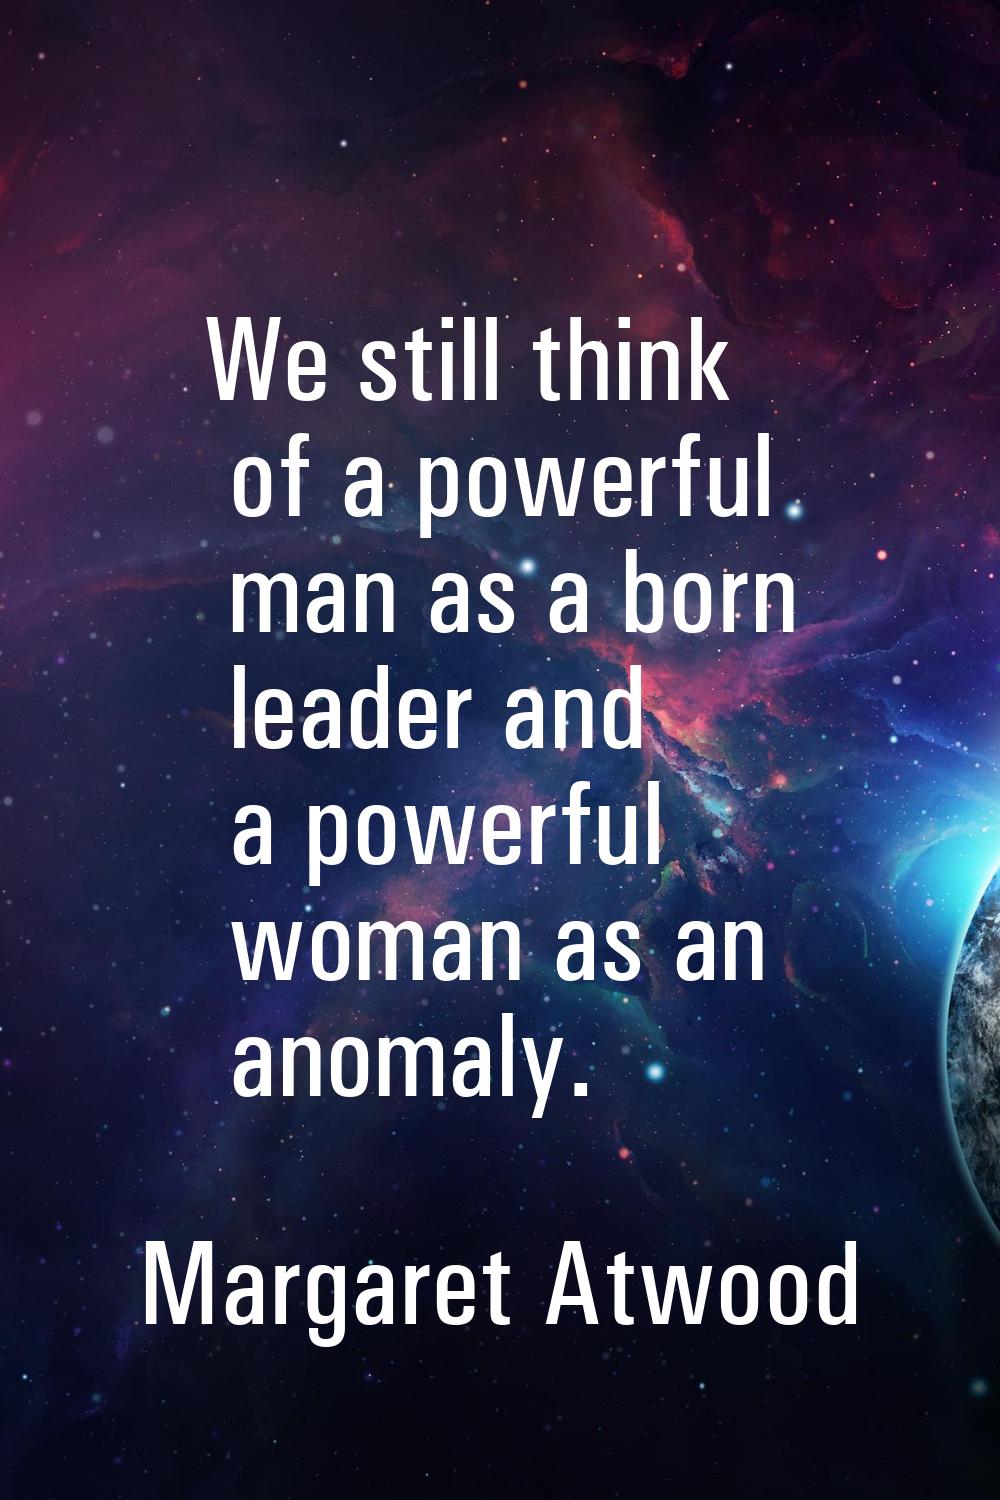 We still think of a powerful man as a born leader and a powerful woman as an anomaly.